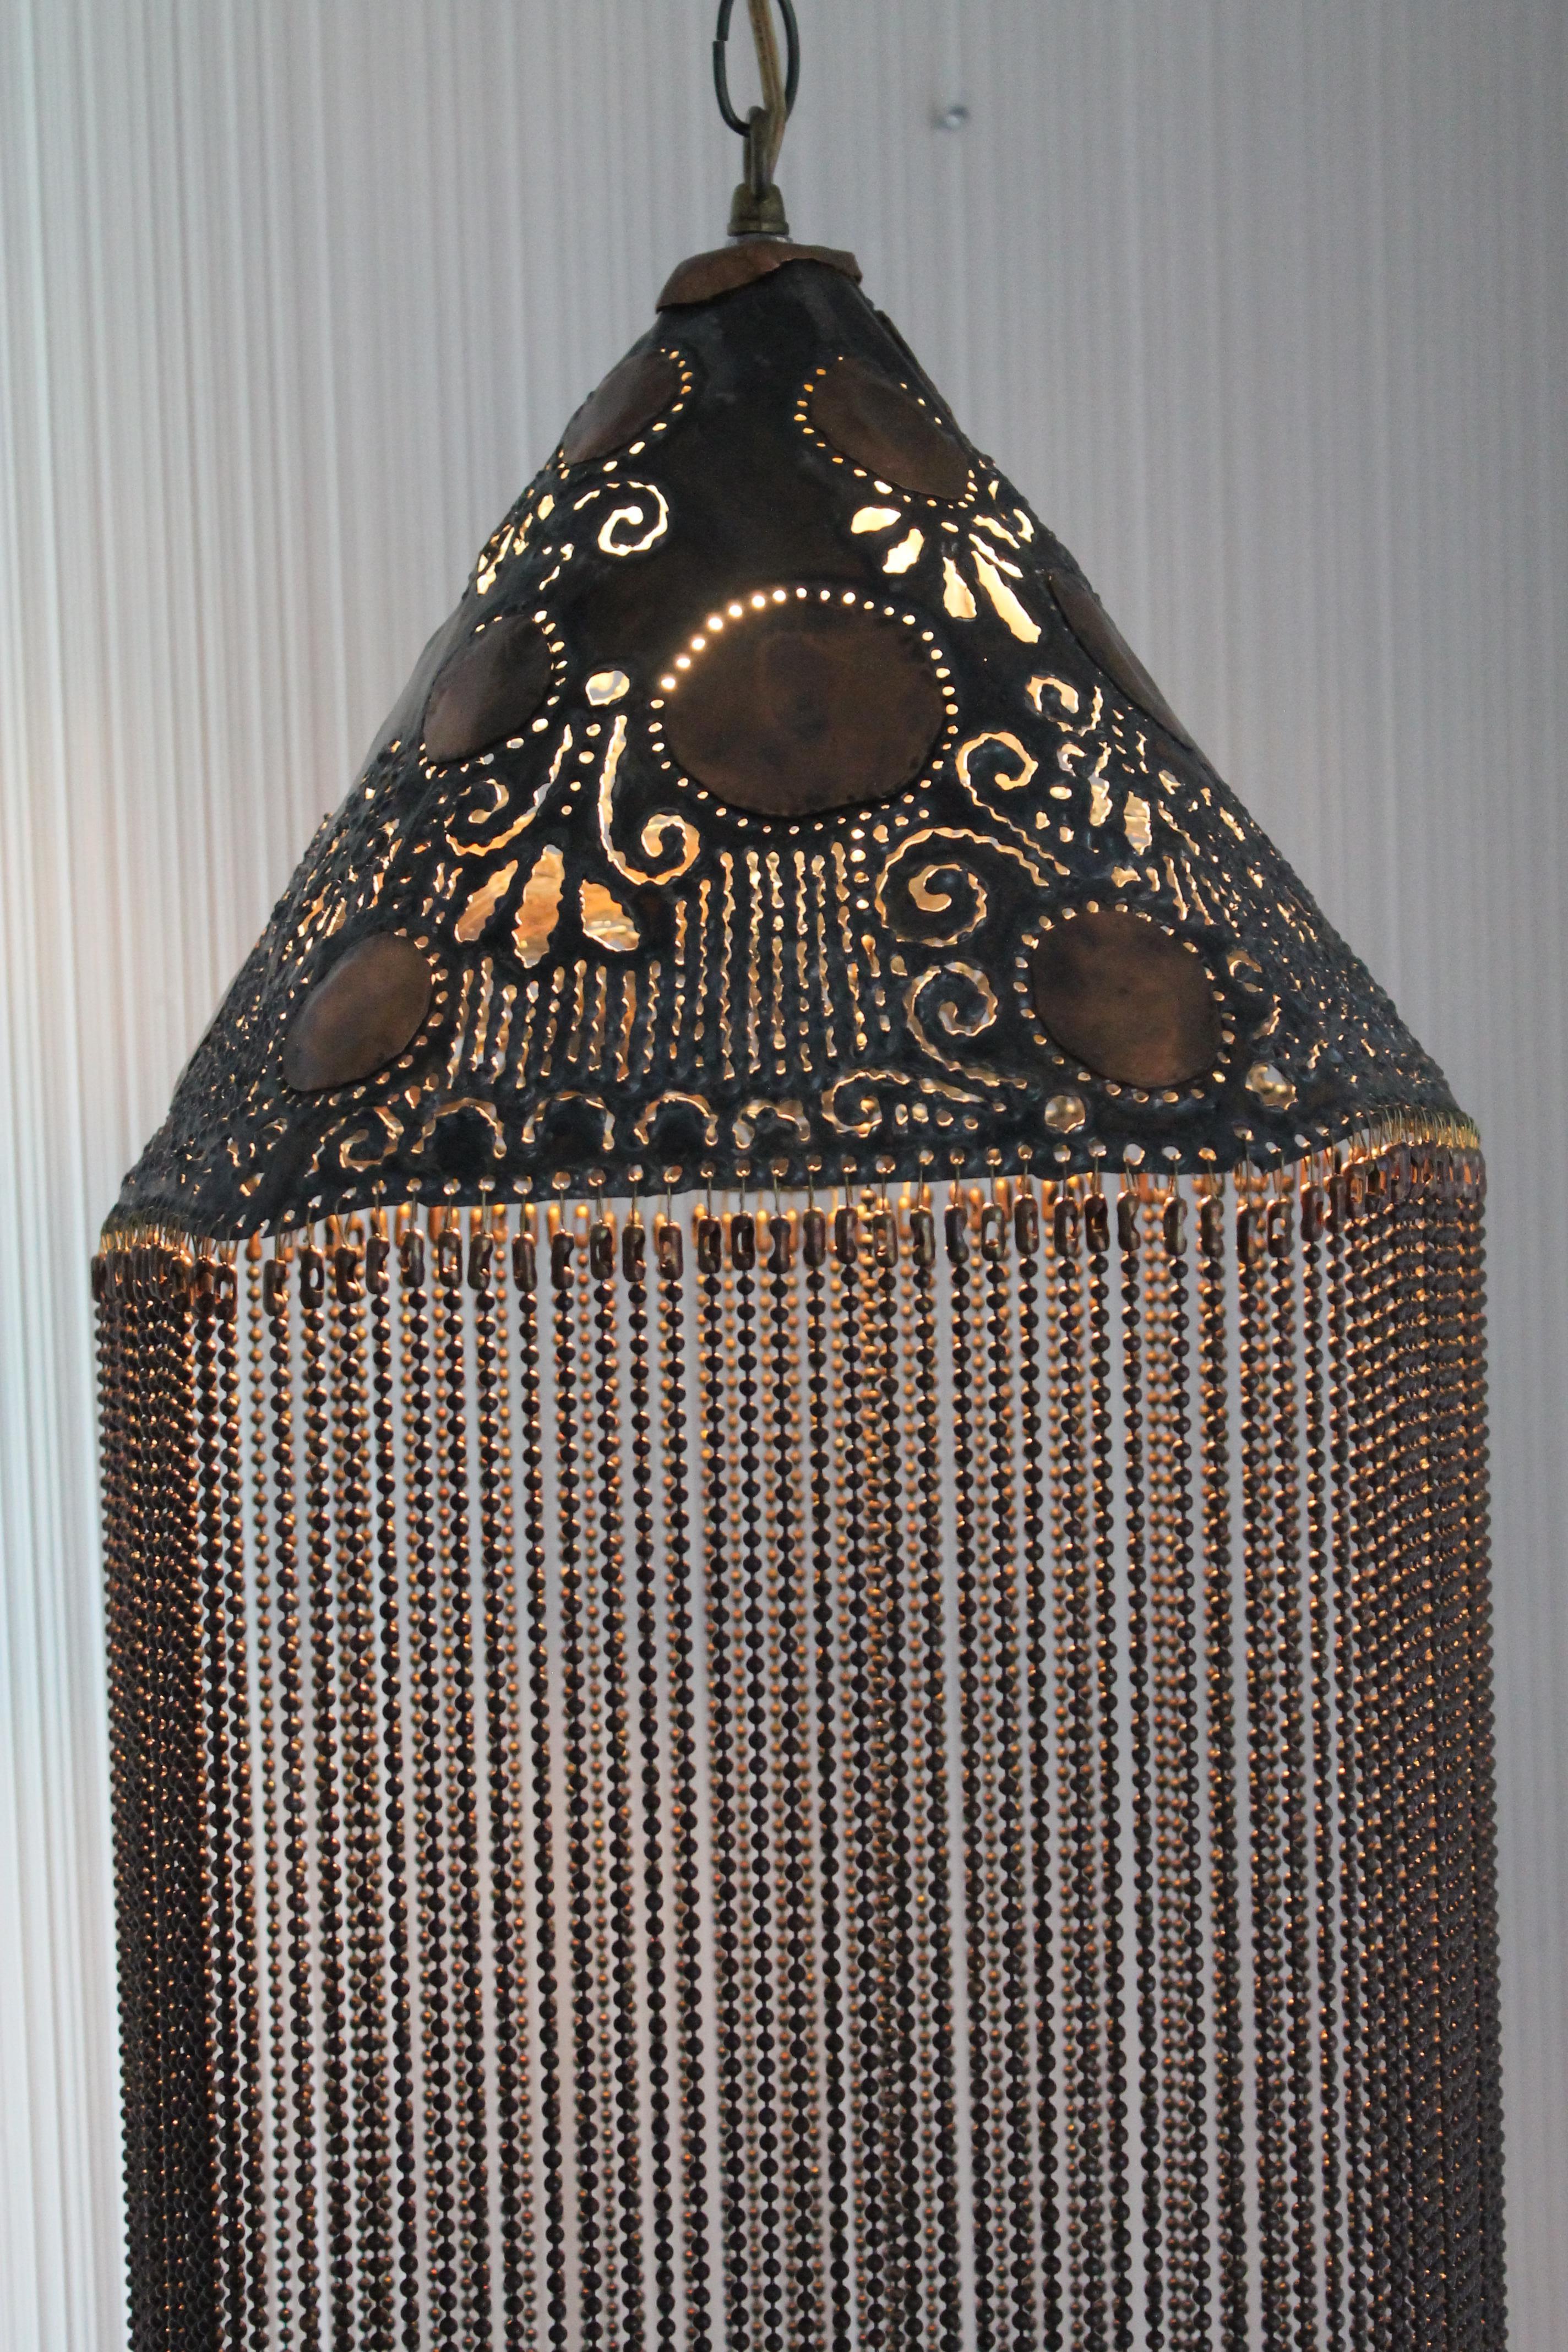 A vintage handcrafted hanging fixture, dated 1977. The cone shaped shade is heavily pierced with psychedelic flower shaped cutouts. Fixture is 30